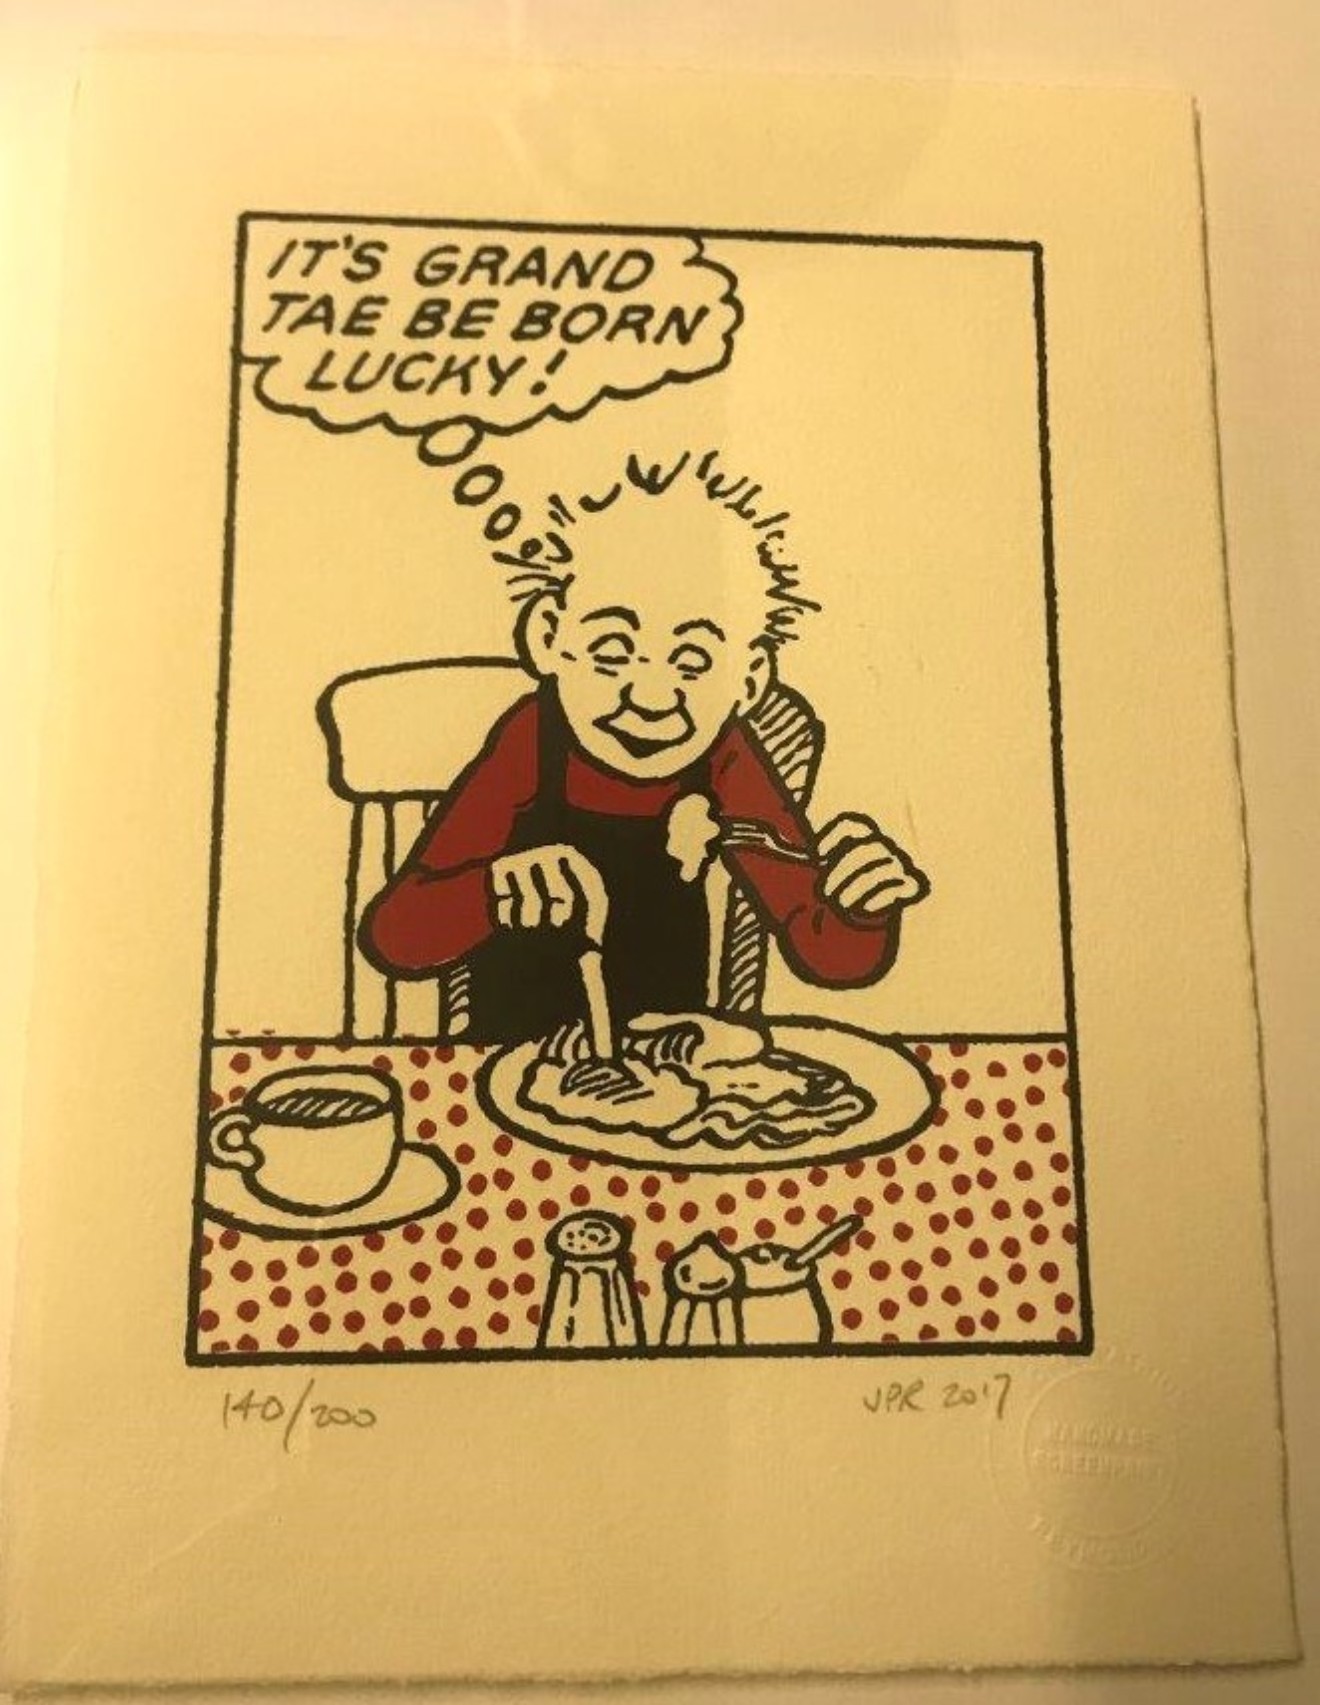 "Oor Wullie" Limited Edition Hand-Made Cotton Paper Screen Print by John Patrick Reynolds EAS Studios Dundee